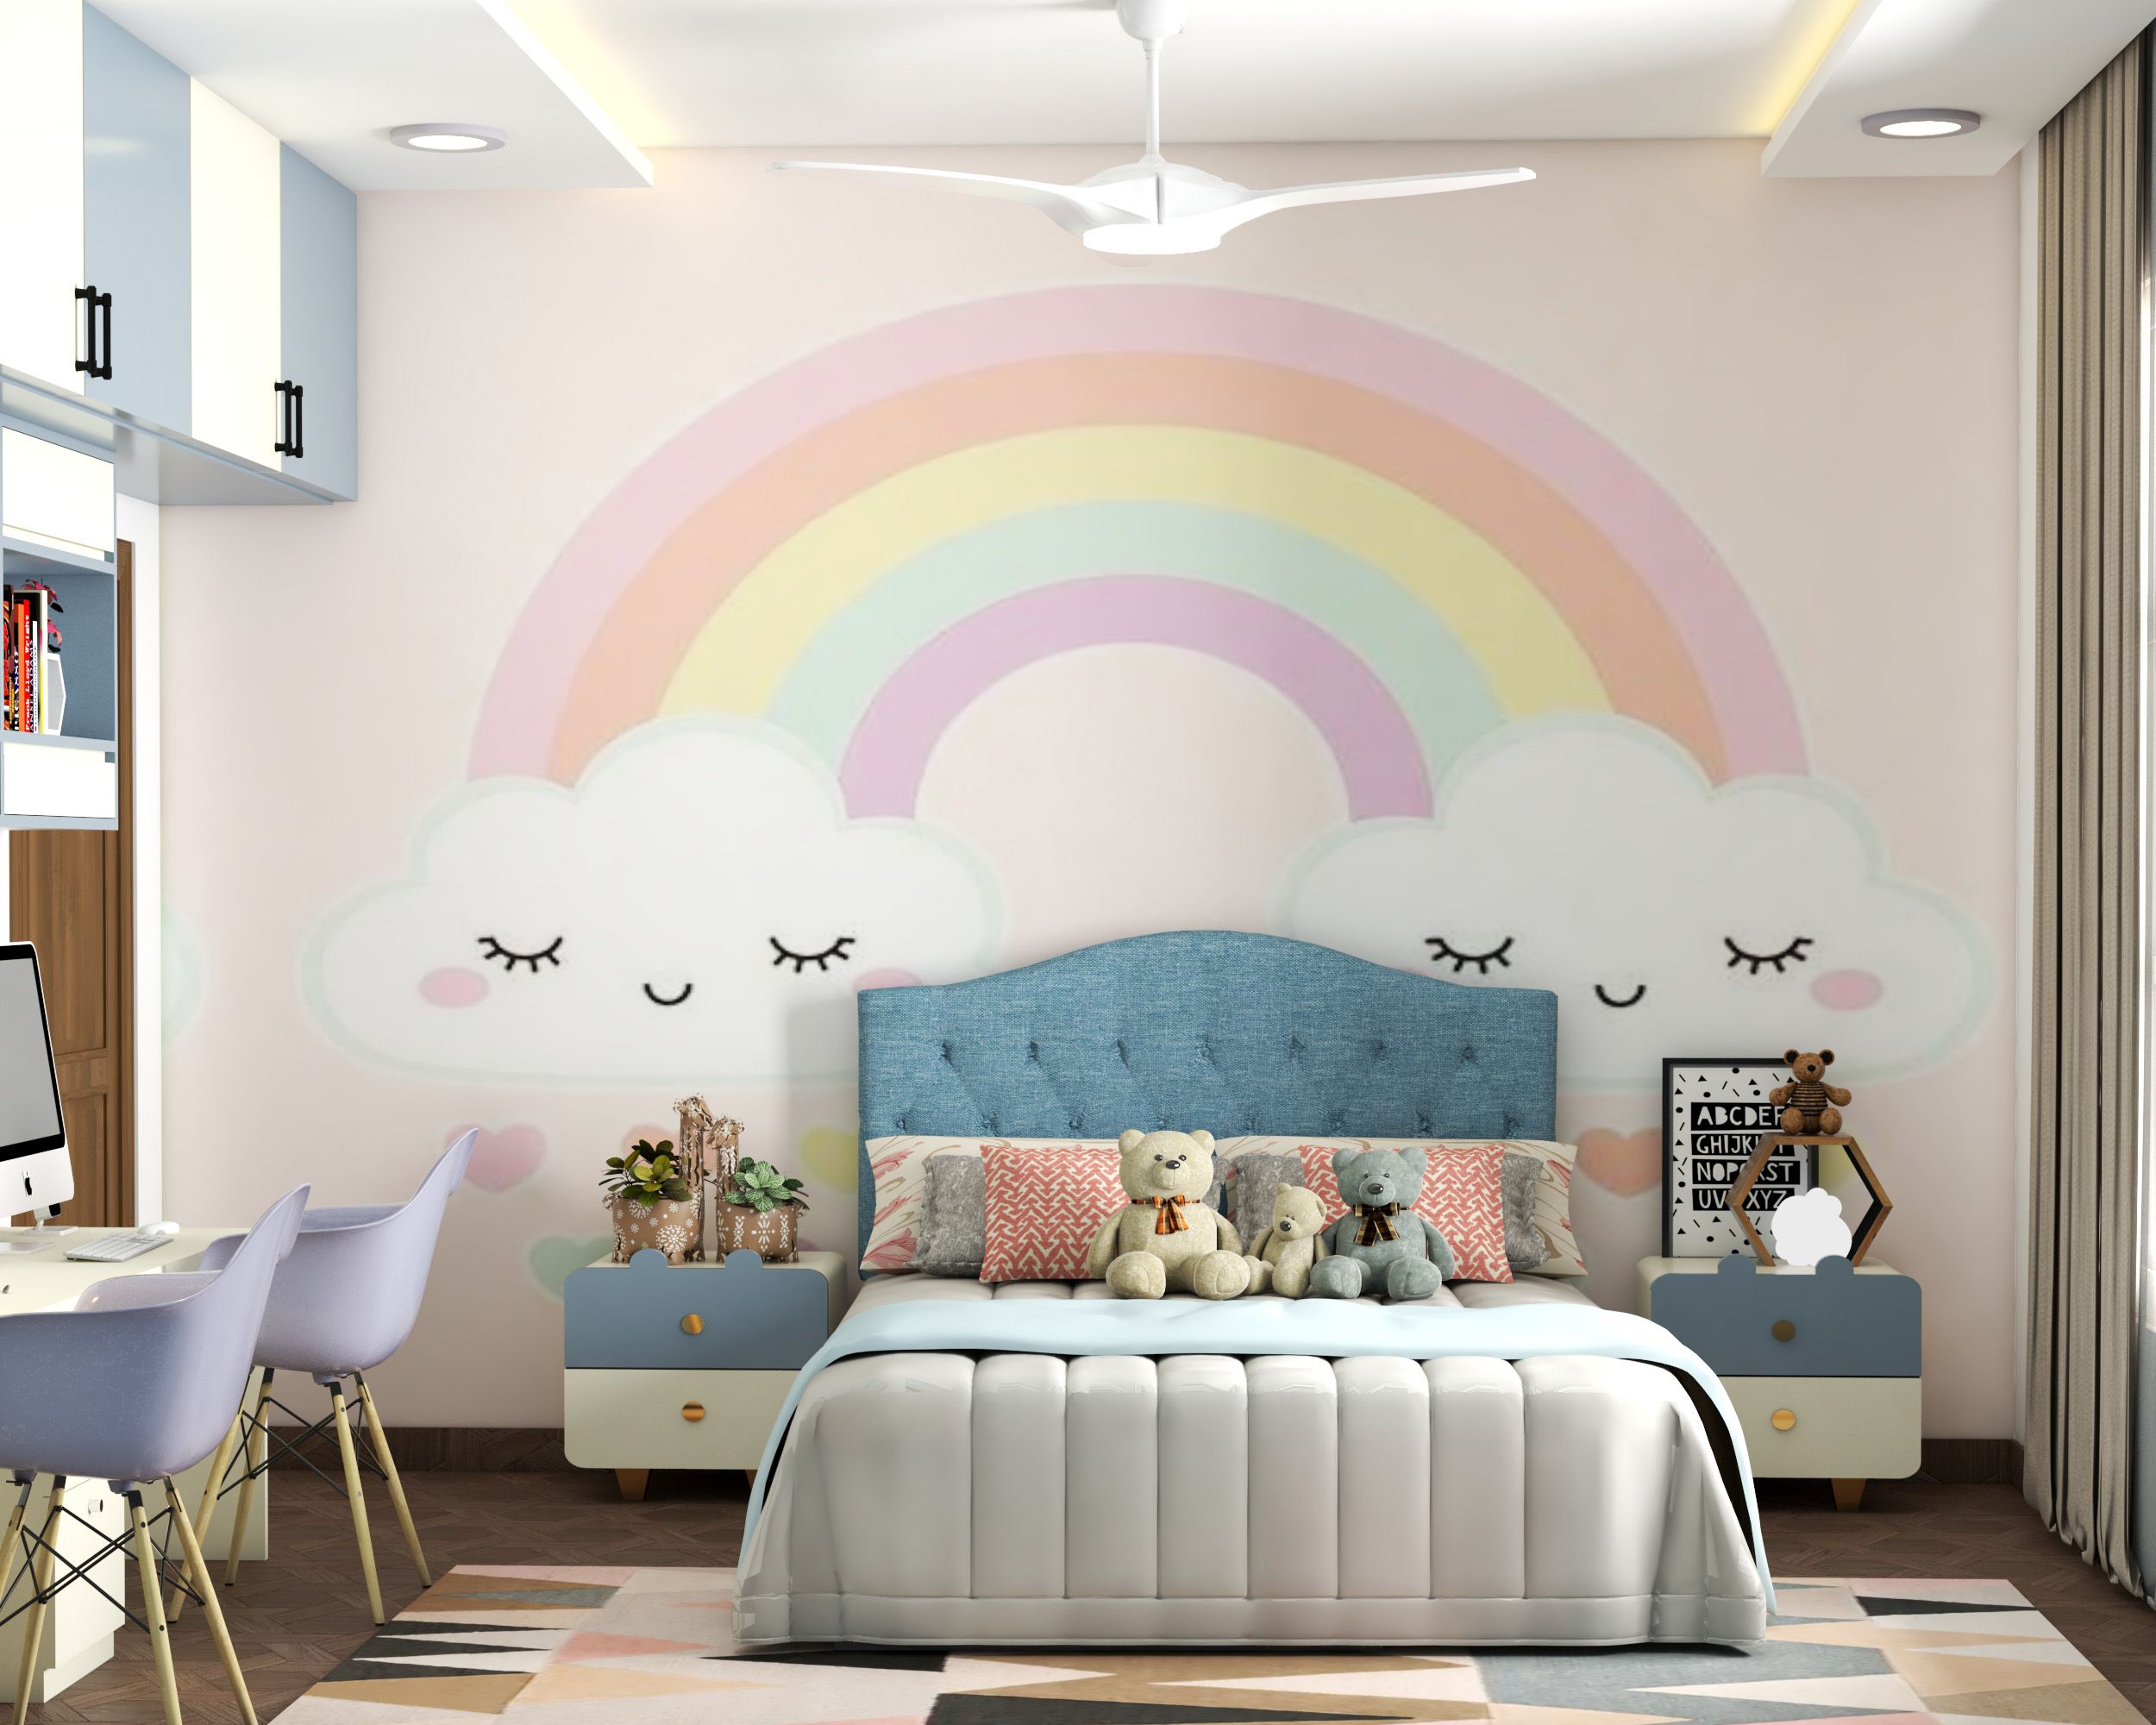 Minimal Kids Room Design For Girls With Rainbow-Themed Wallpaper